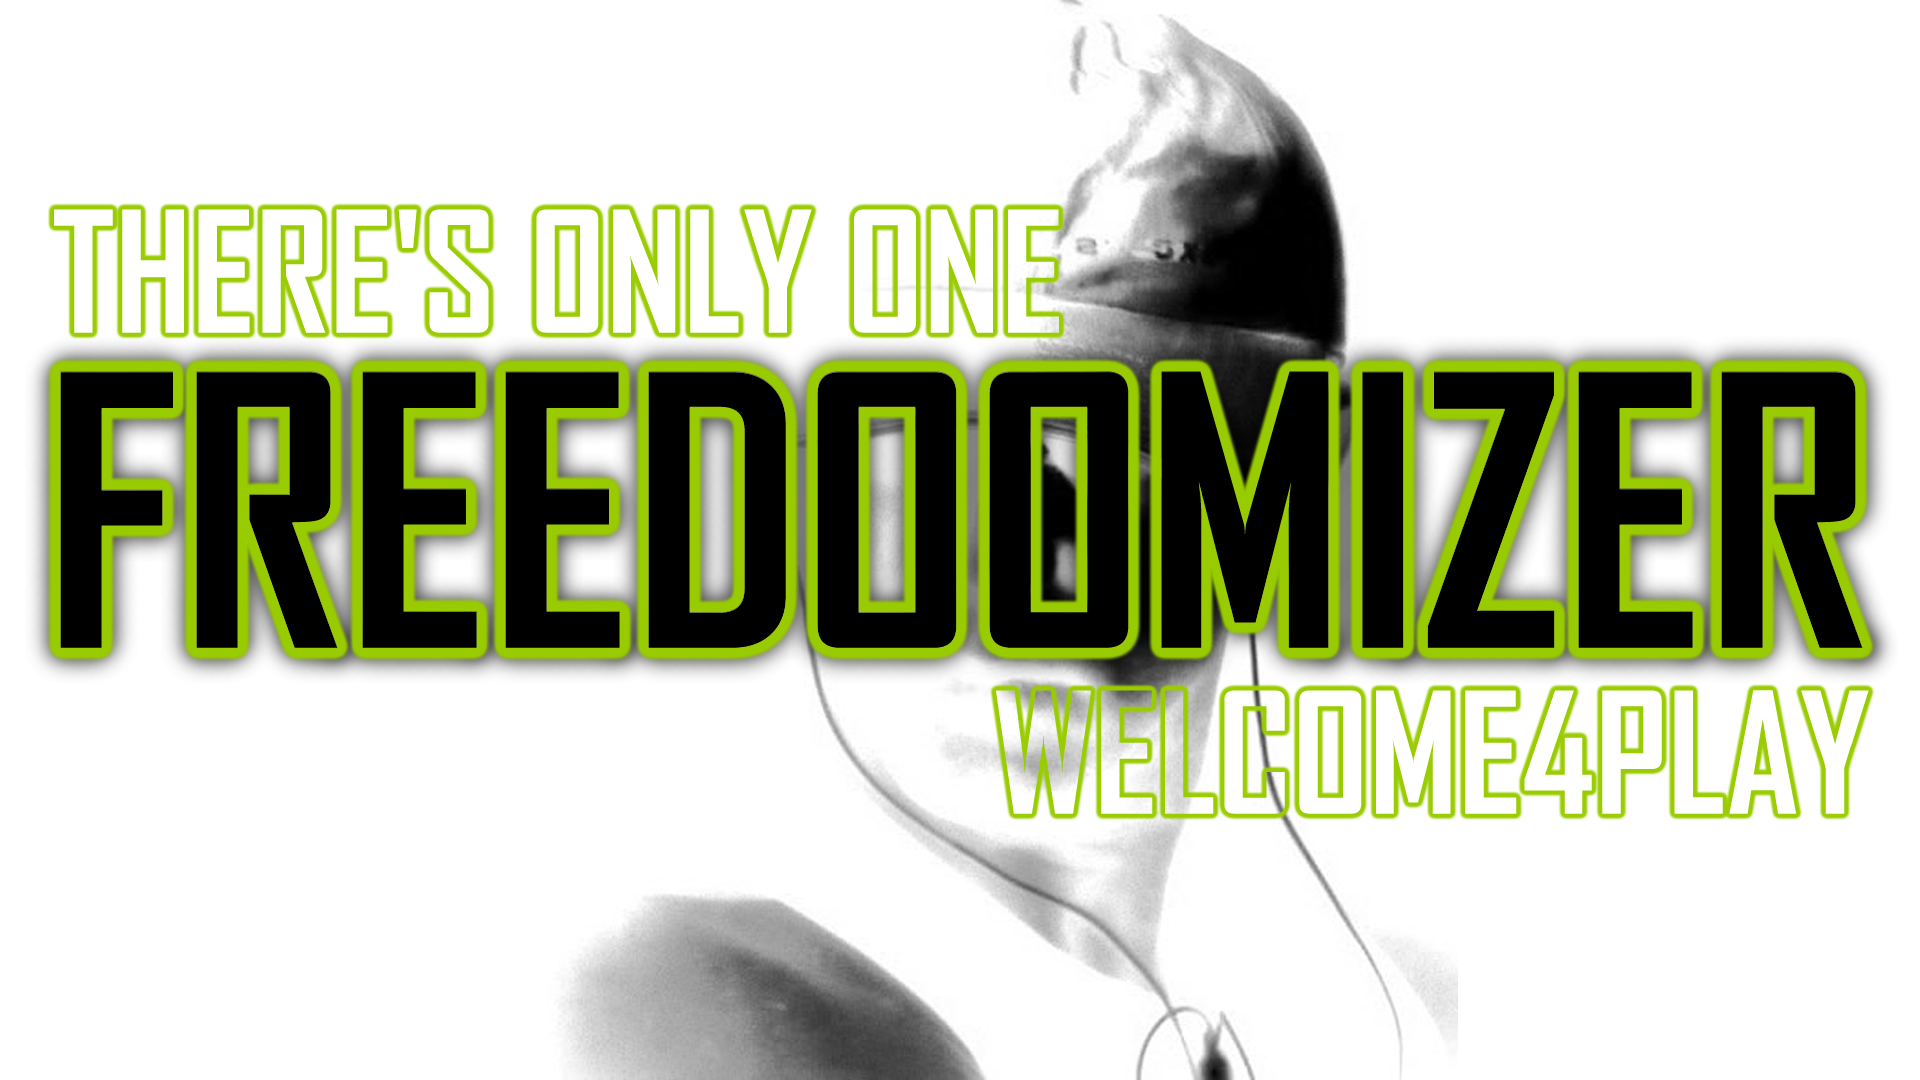 There's only one FREEDOOMIZER